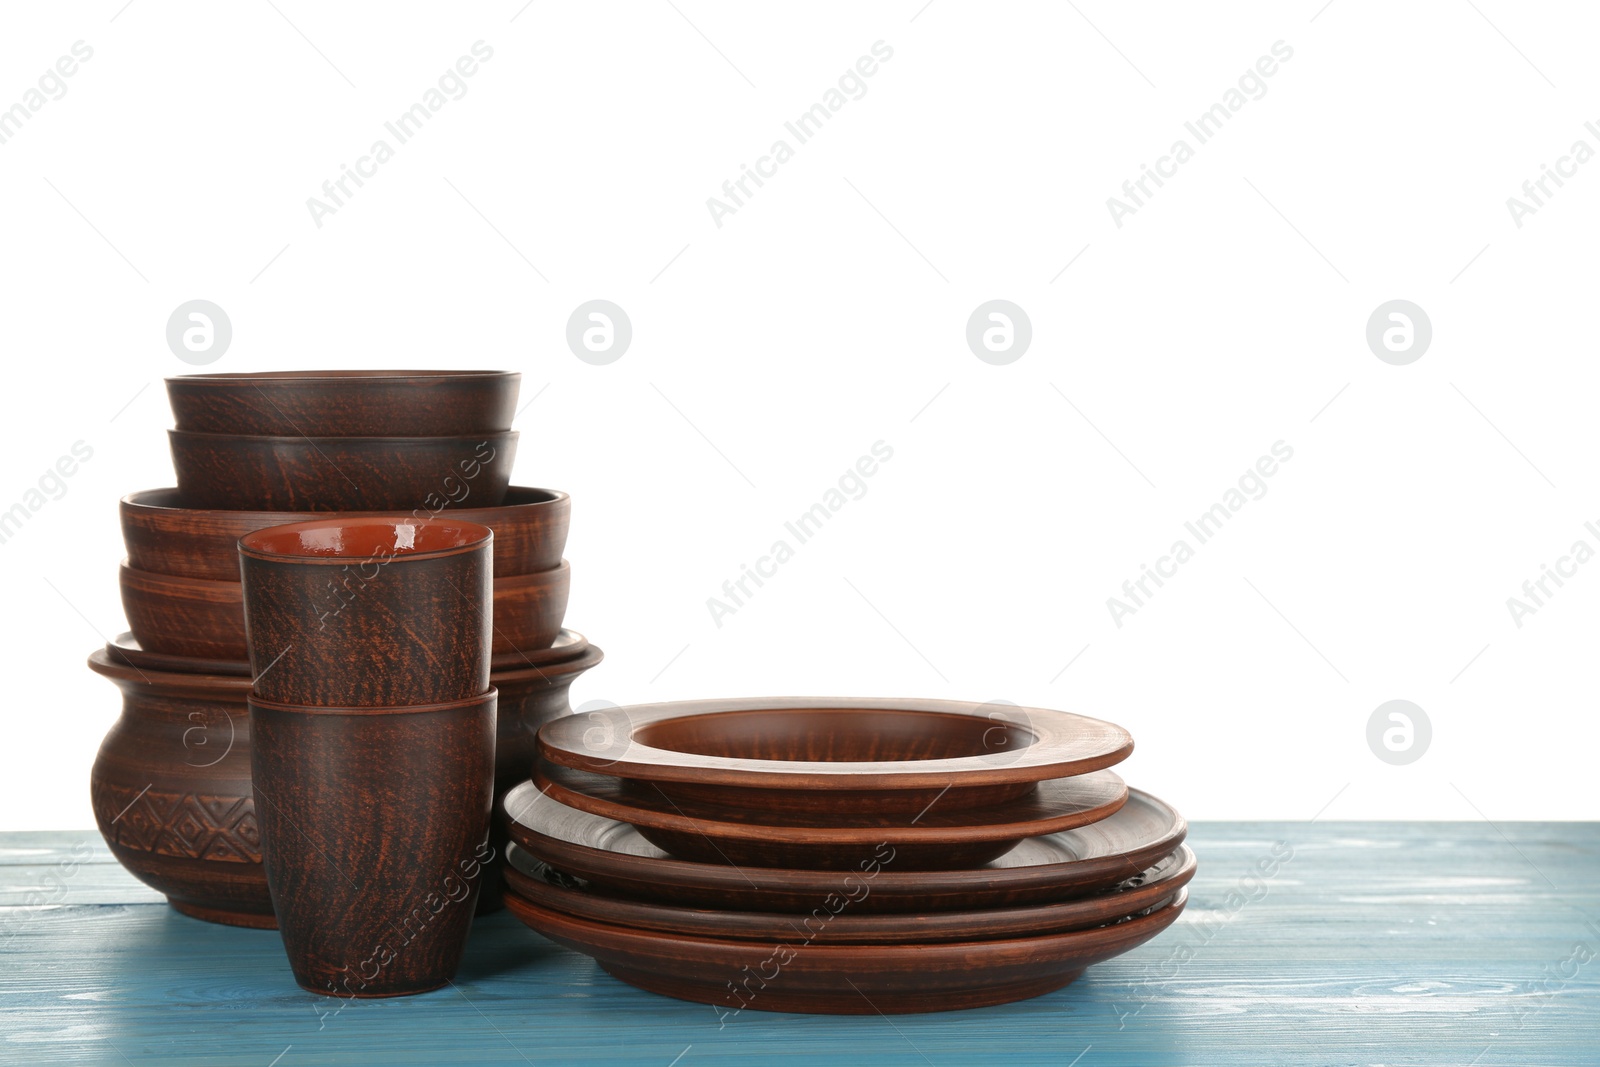 Photo of Different clay dishware on light blue wooden table against white background